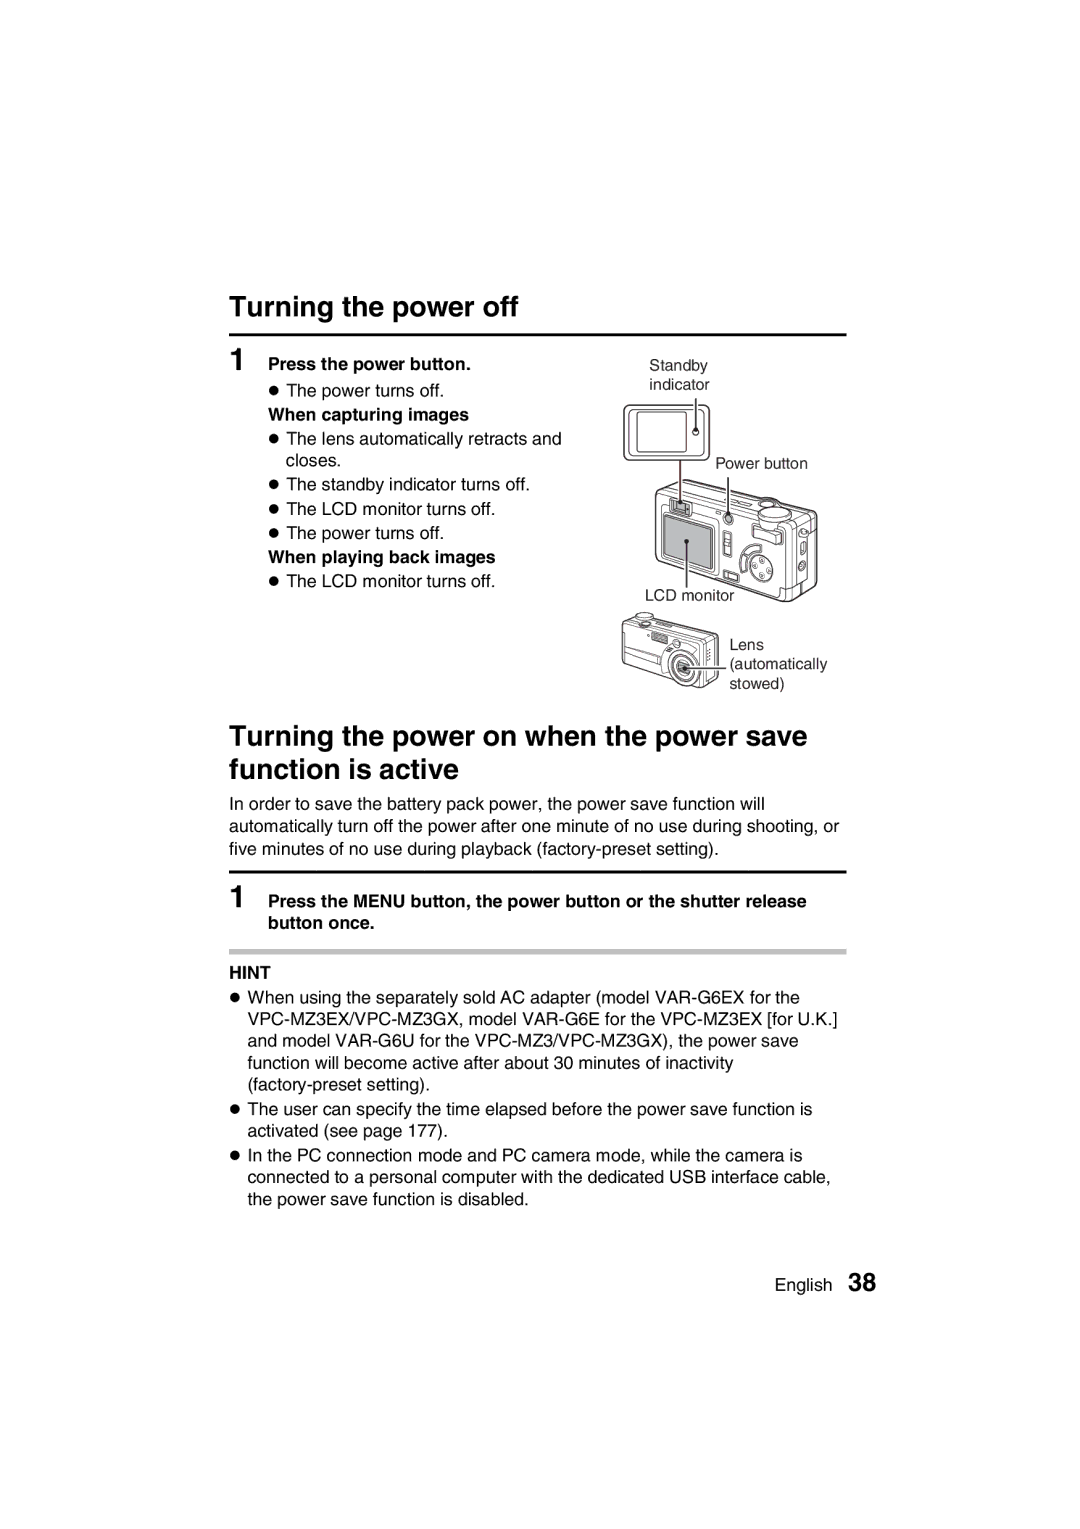 Sanyo VPC-MZ3 Turning the power off, Turning the power on when the power save function is active, When capturing images 